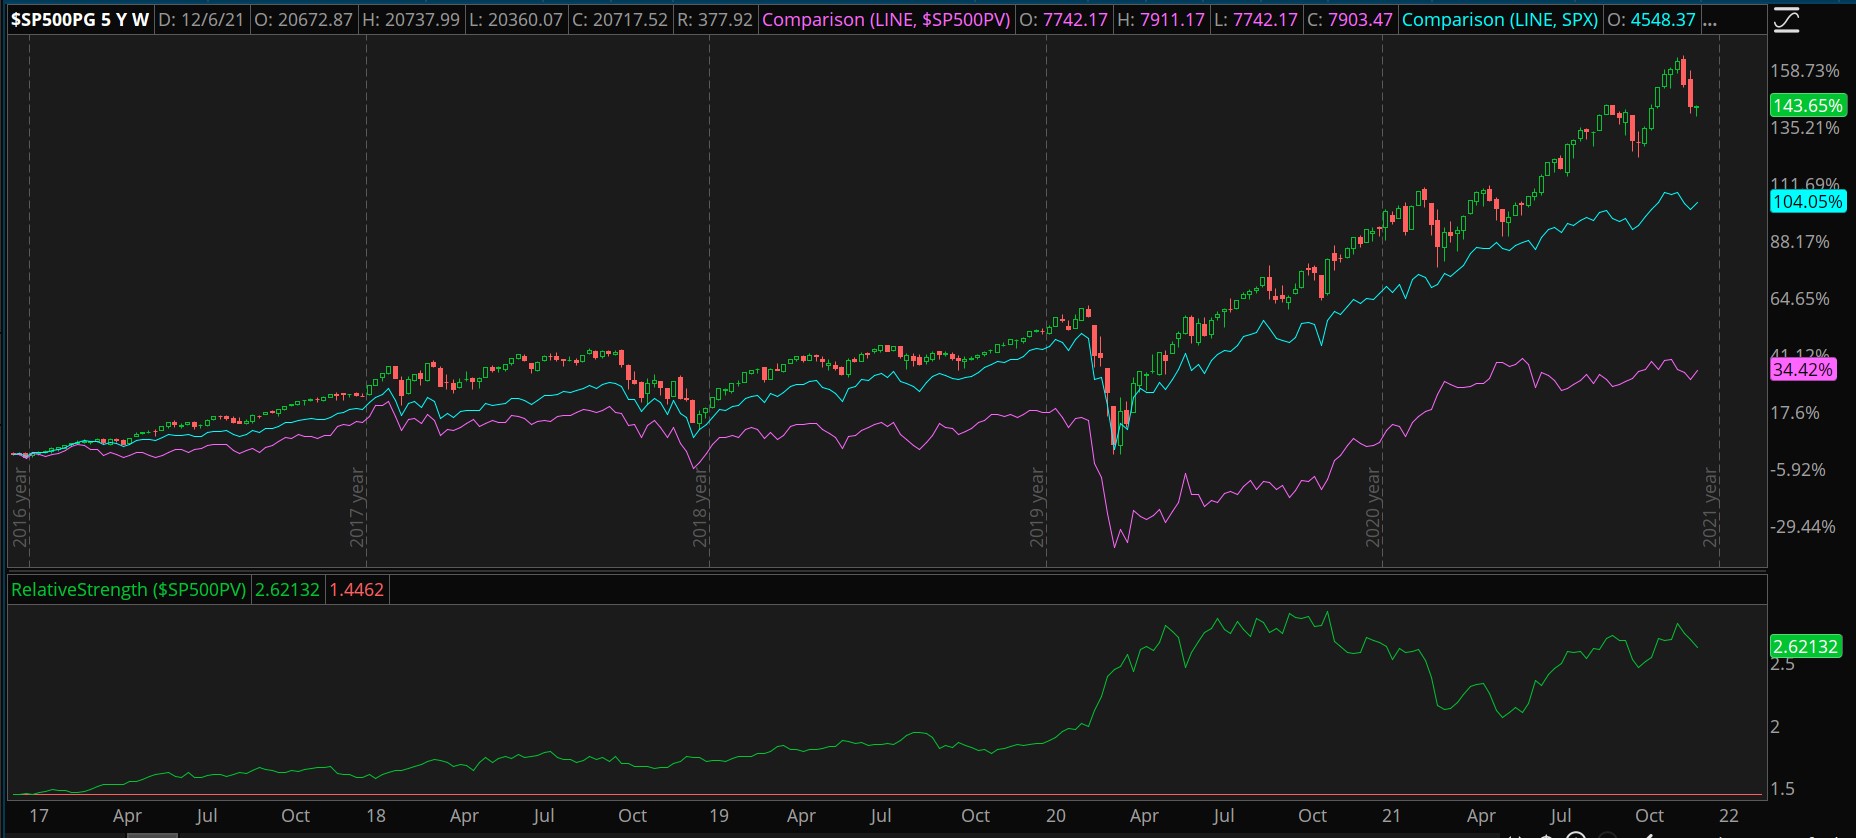 S&P 500 Pure Growth Index, SPX And S&P 500 Pure Value Index.